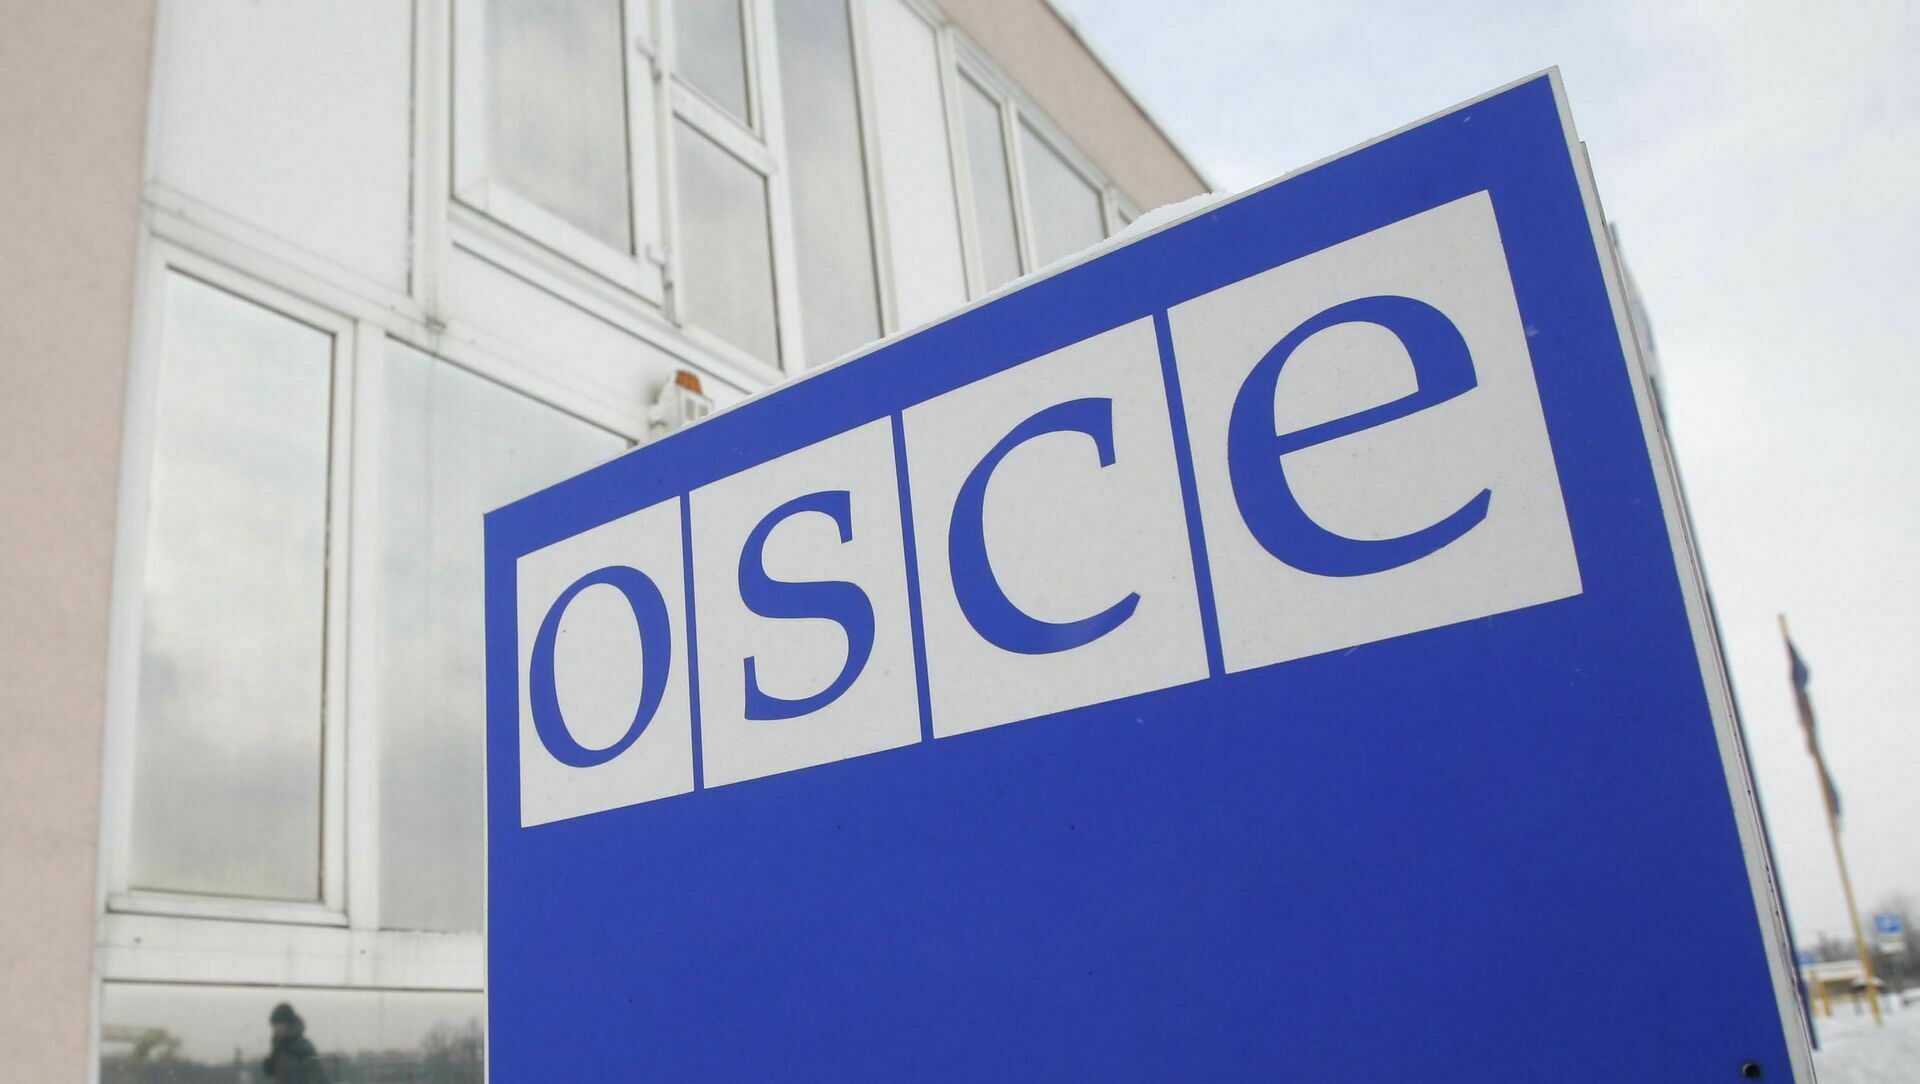 The Public Chamber of the Russian Federation was not allowed to the conference at the OSCE site